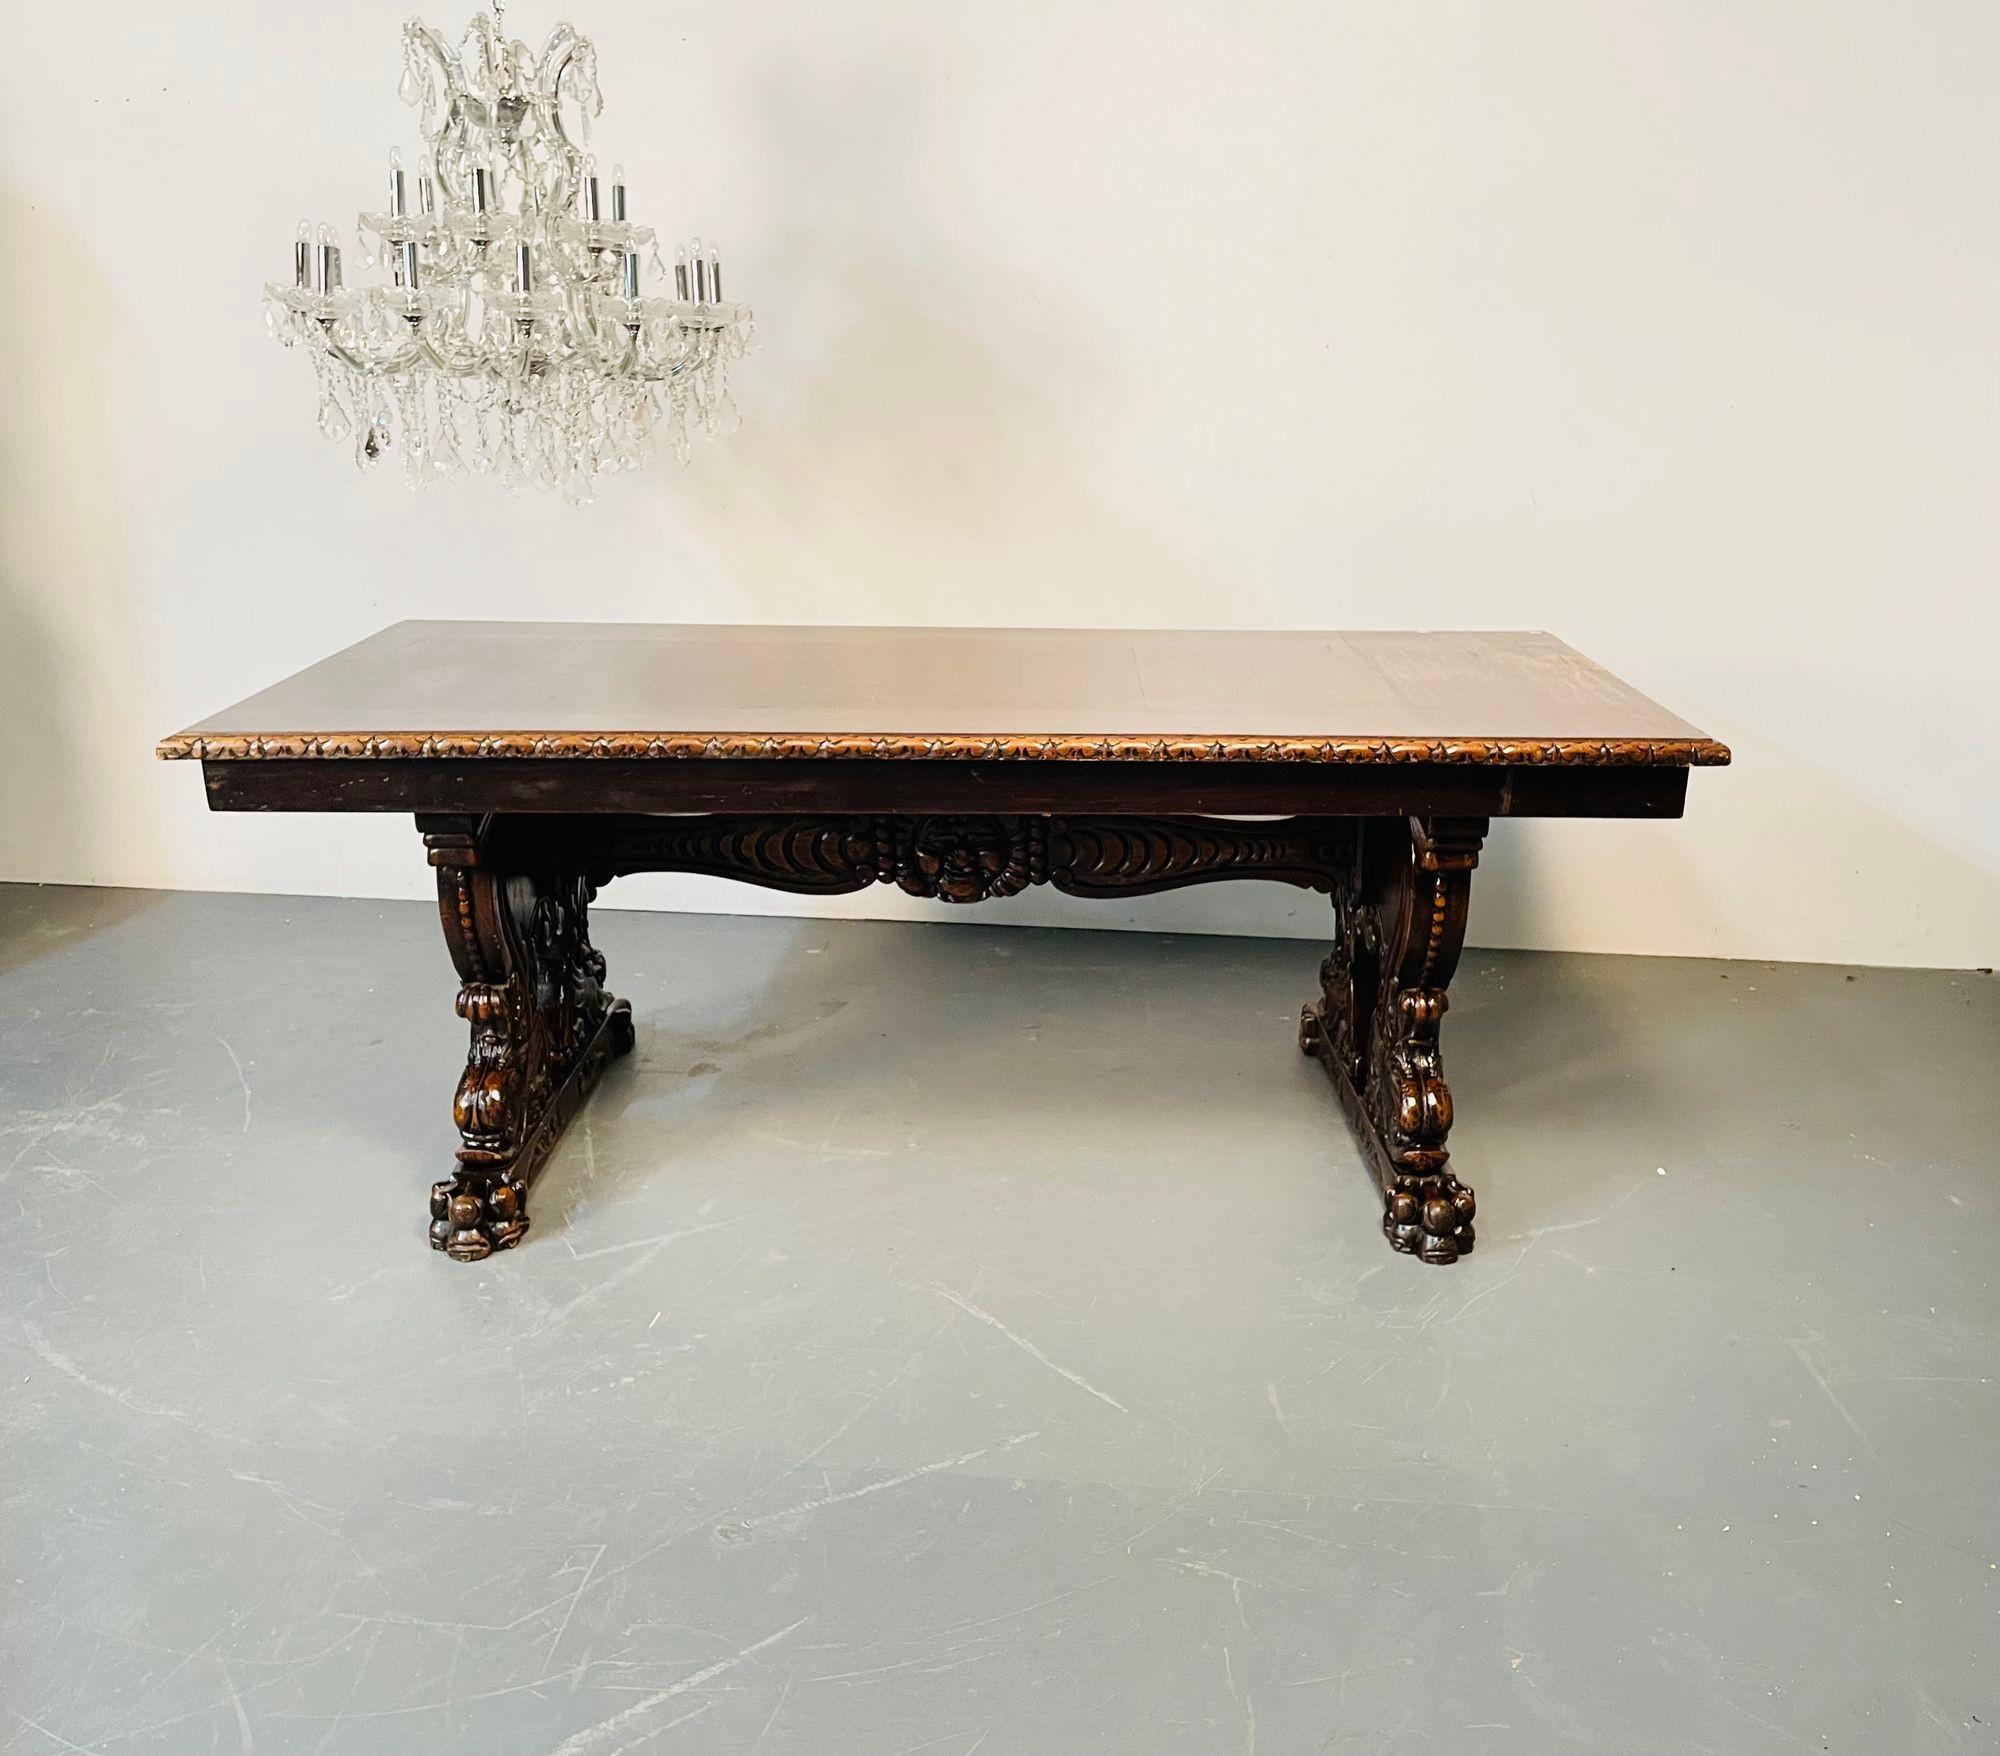 Renaissance Carved Dining Center Table, Dolphin Claw Foot Base, 19th Century In Fair Condition For Sale In Stamford, CT